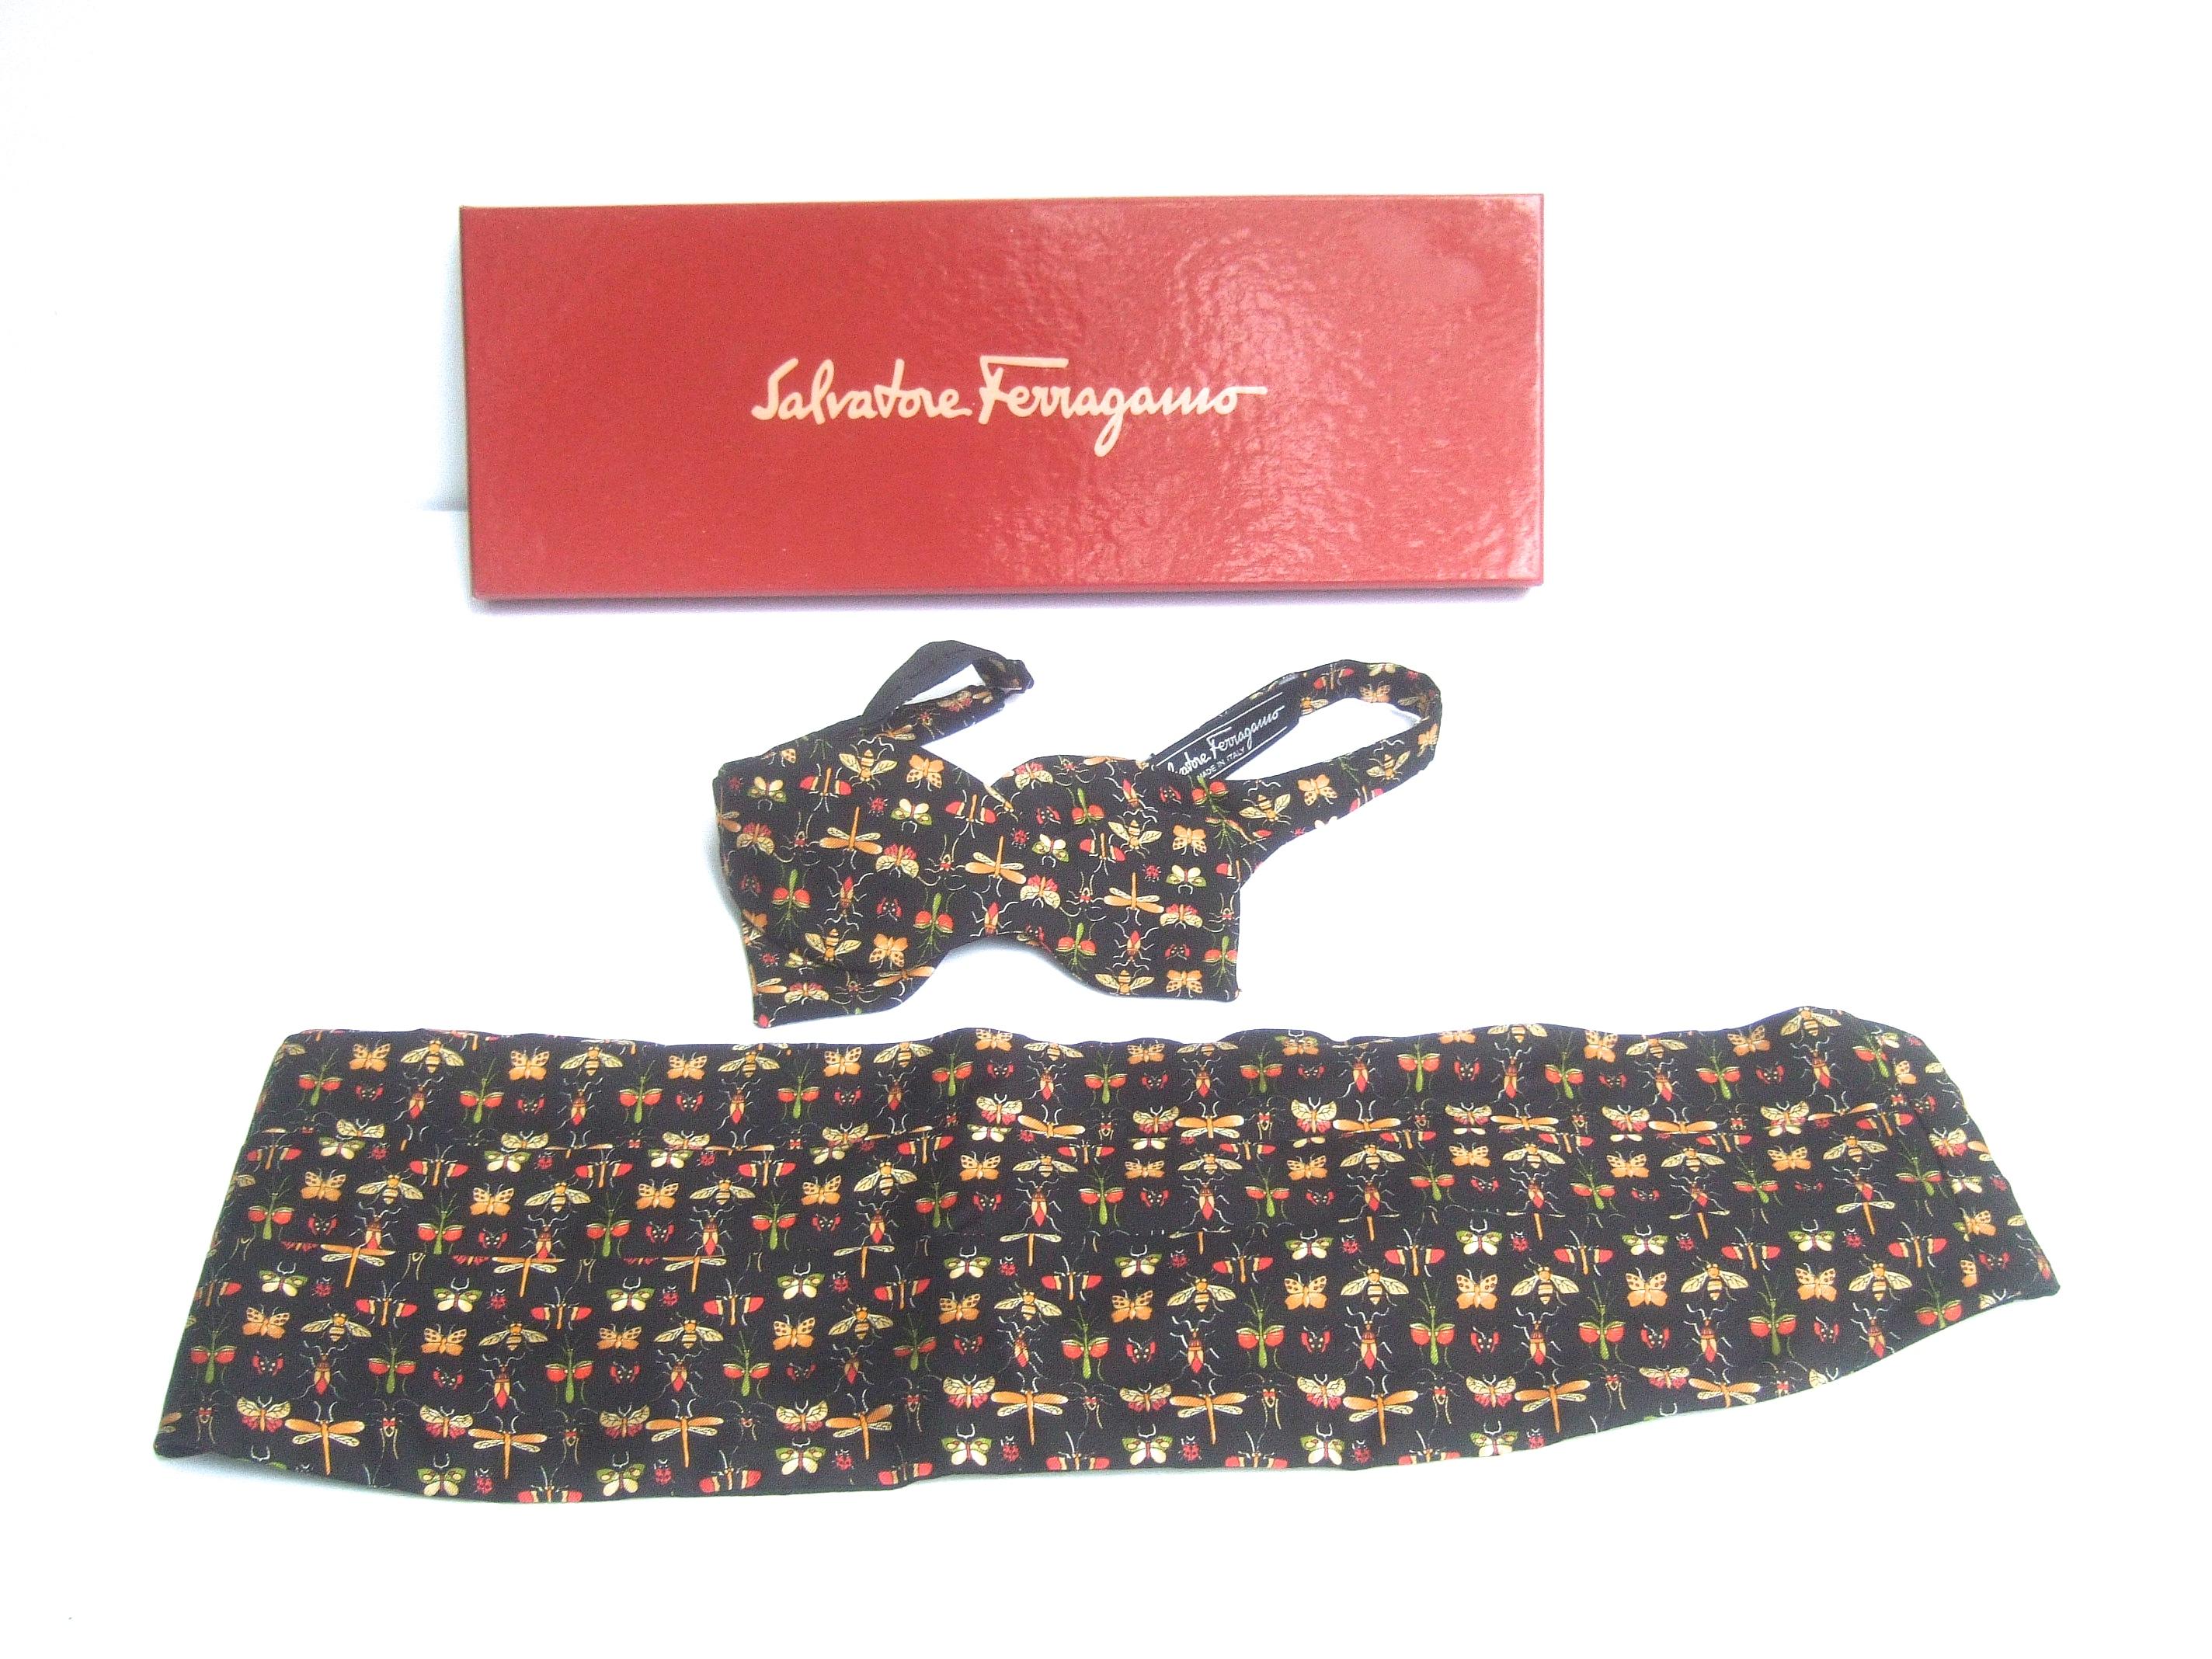 Salvatore Ferragamo Italian silk insect print cummerbund & bow tie set in box c 1990
The stylish silk bow tie & cummerbund are illustrated with a collection 
of insects; bees, butterflies, dragonflies & varies species of flying insects 
set against